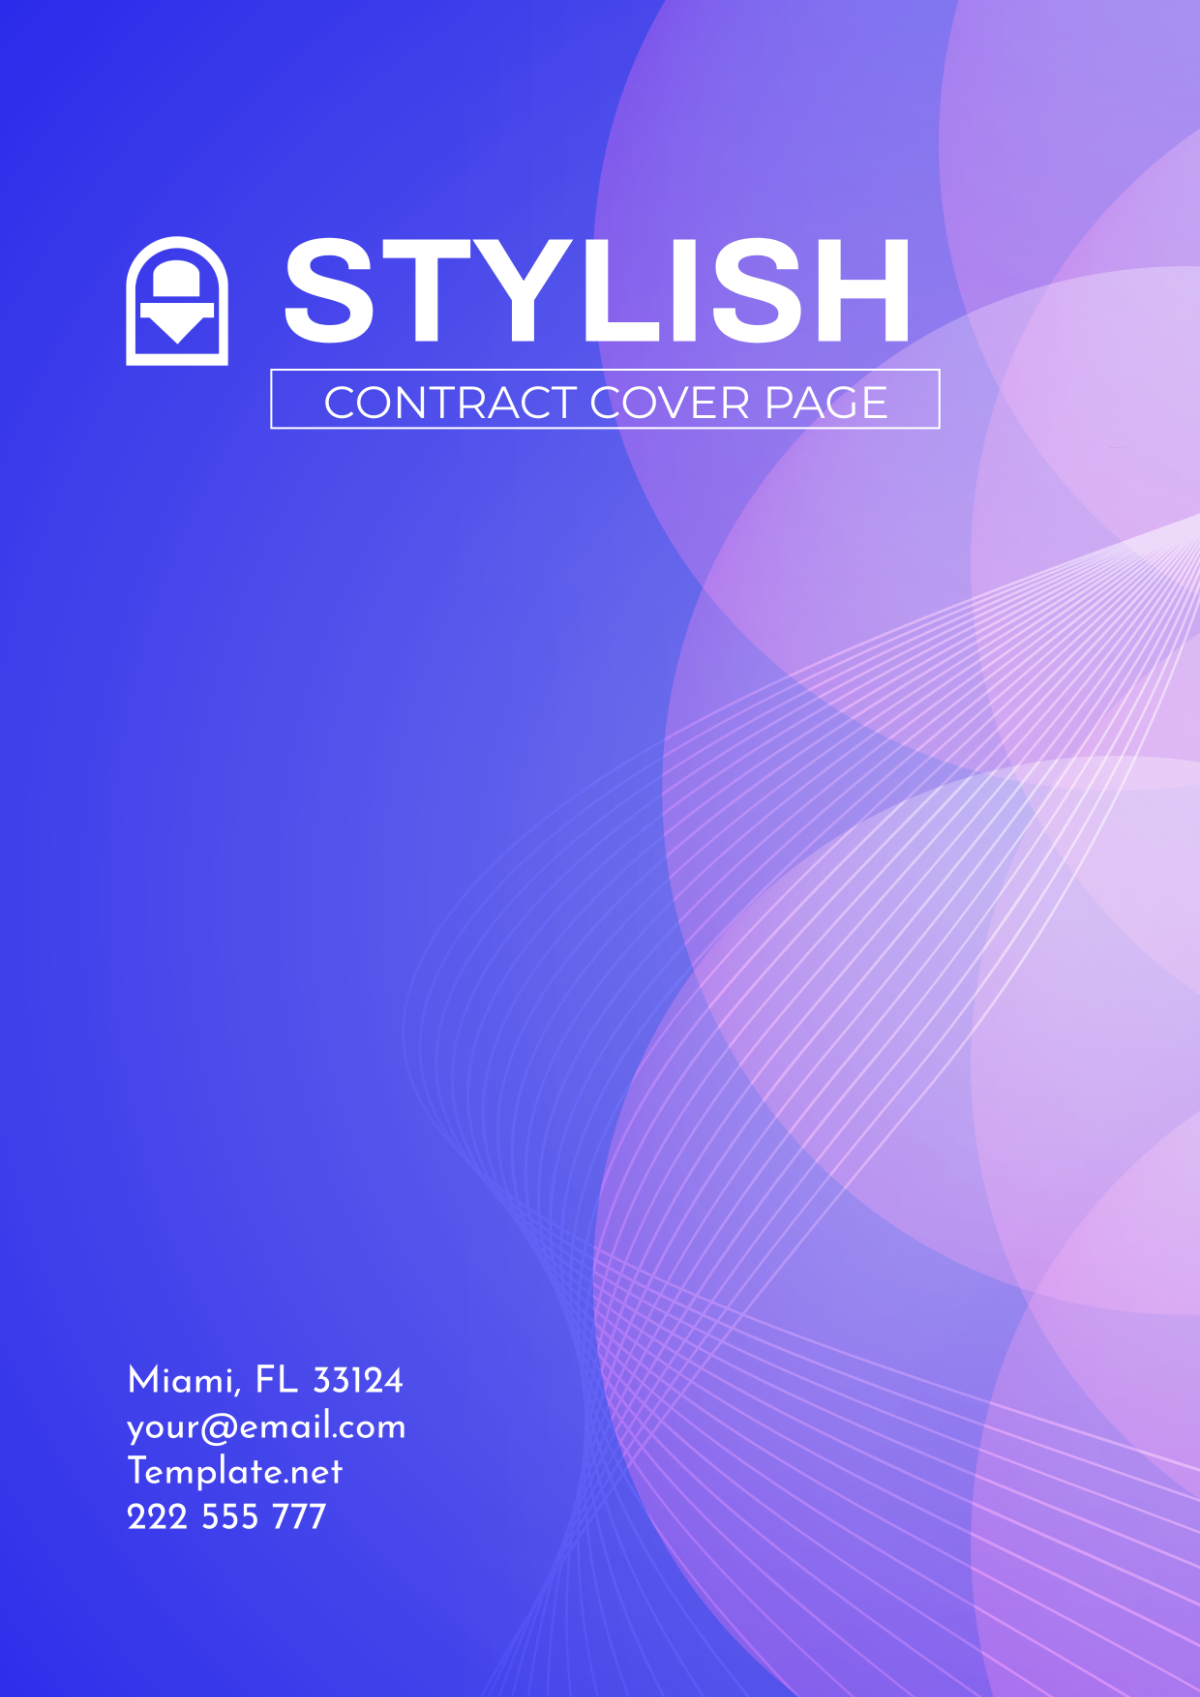 Stylish Contract Cover Page Template